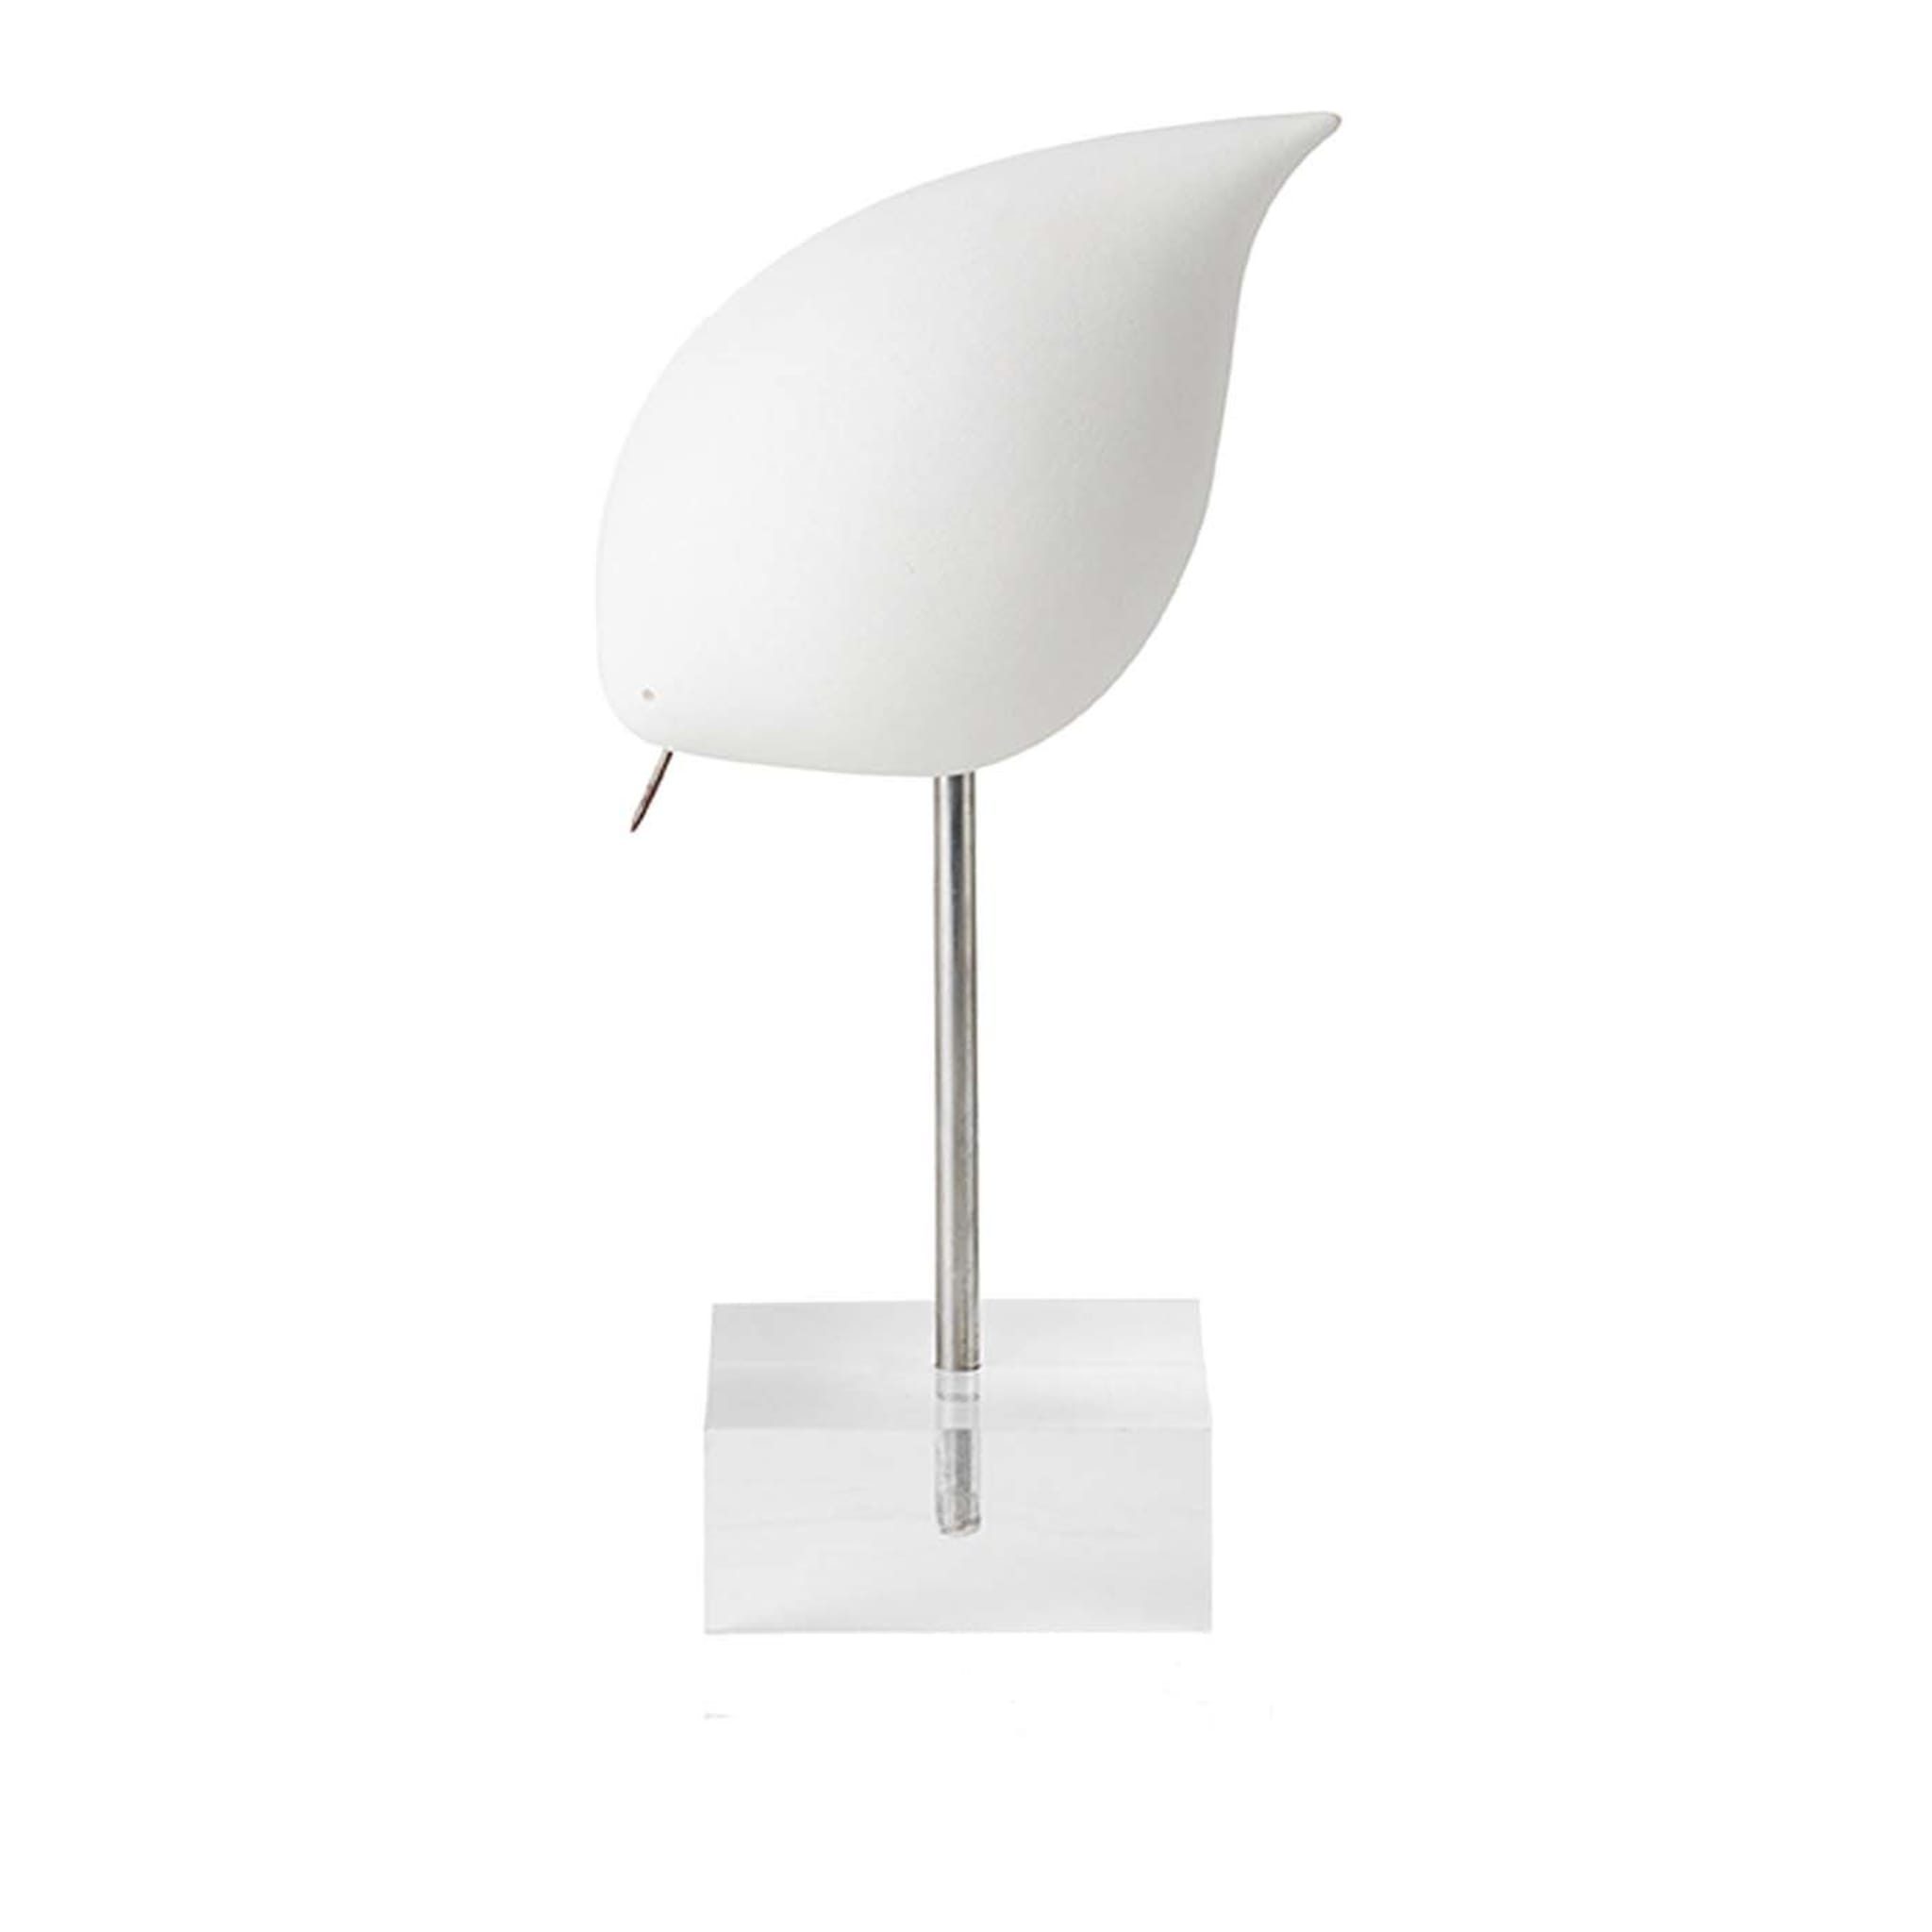 White Bird on a Stand by Aldo Londi #1 - Main view